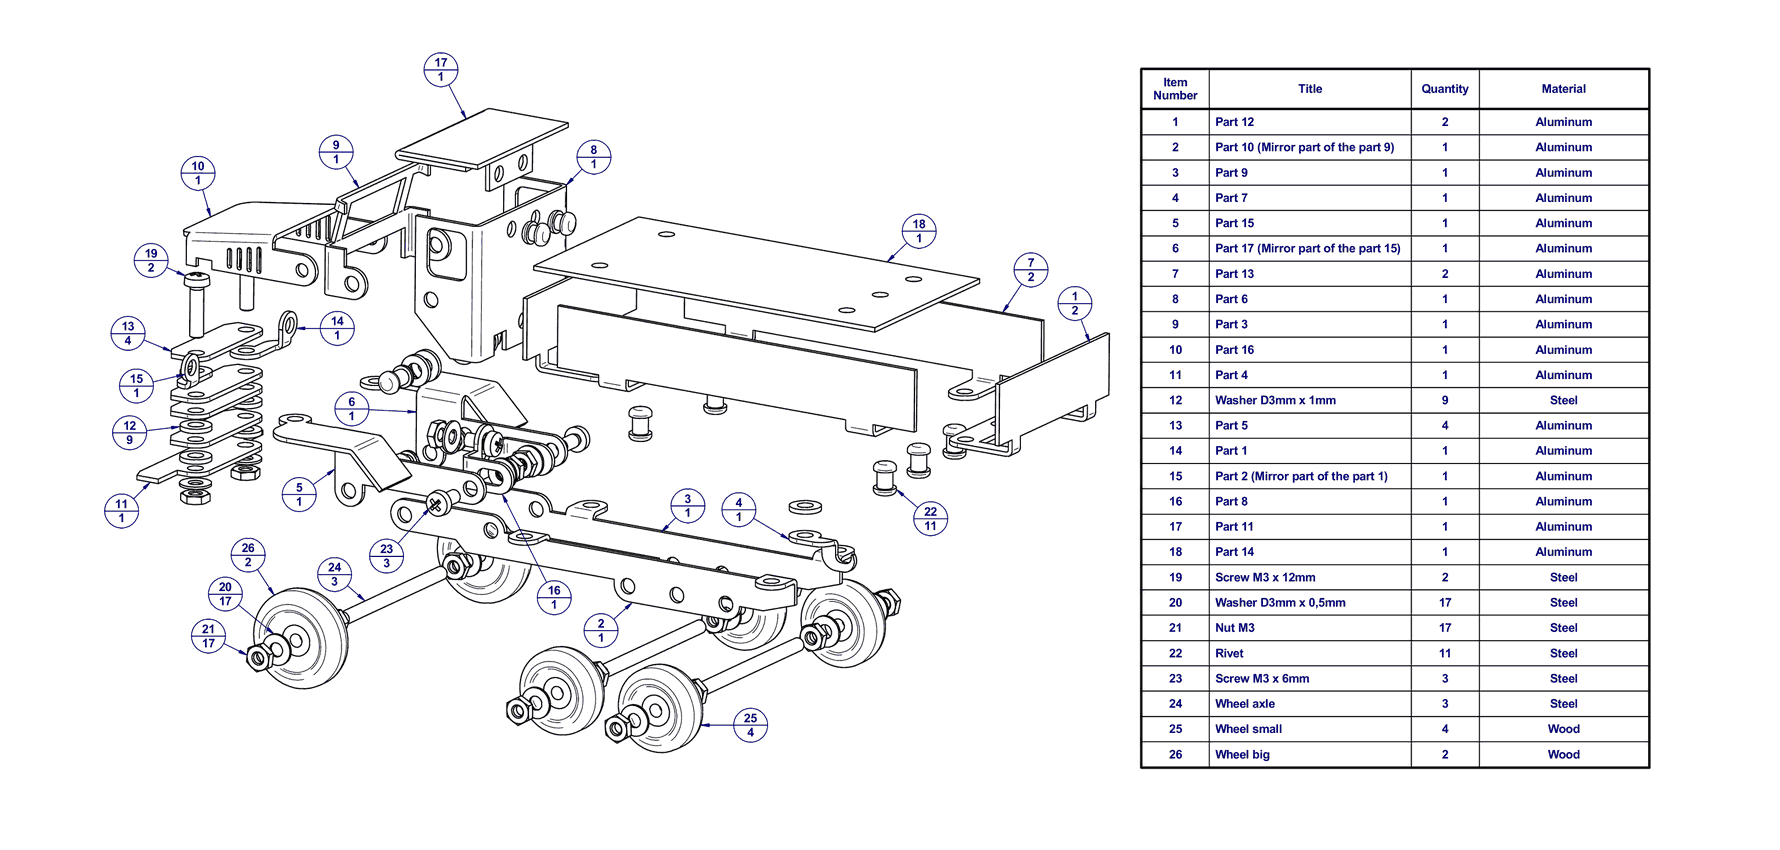 Where can used dump truck parts be purchased?